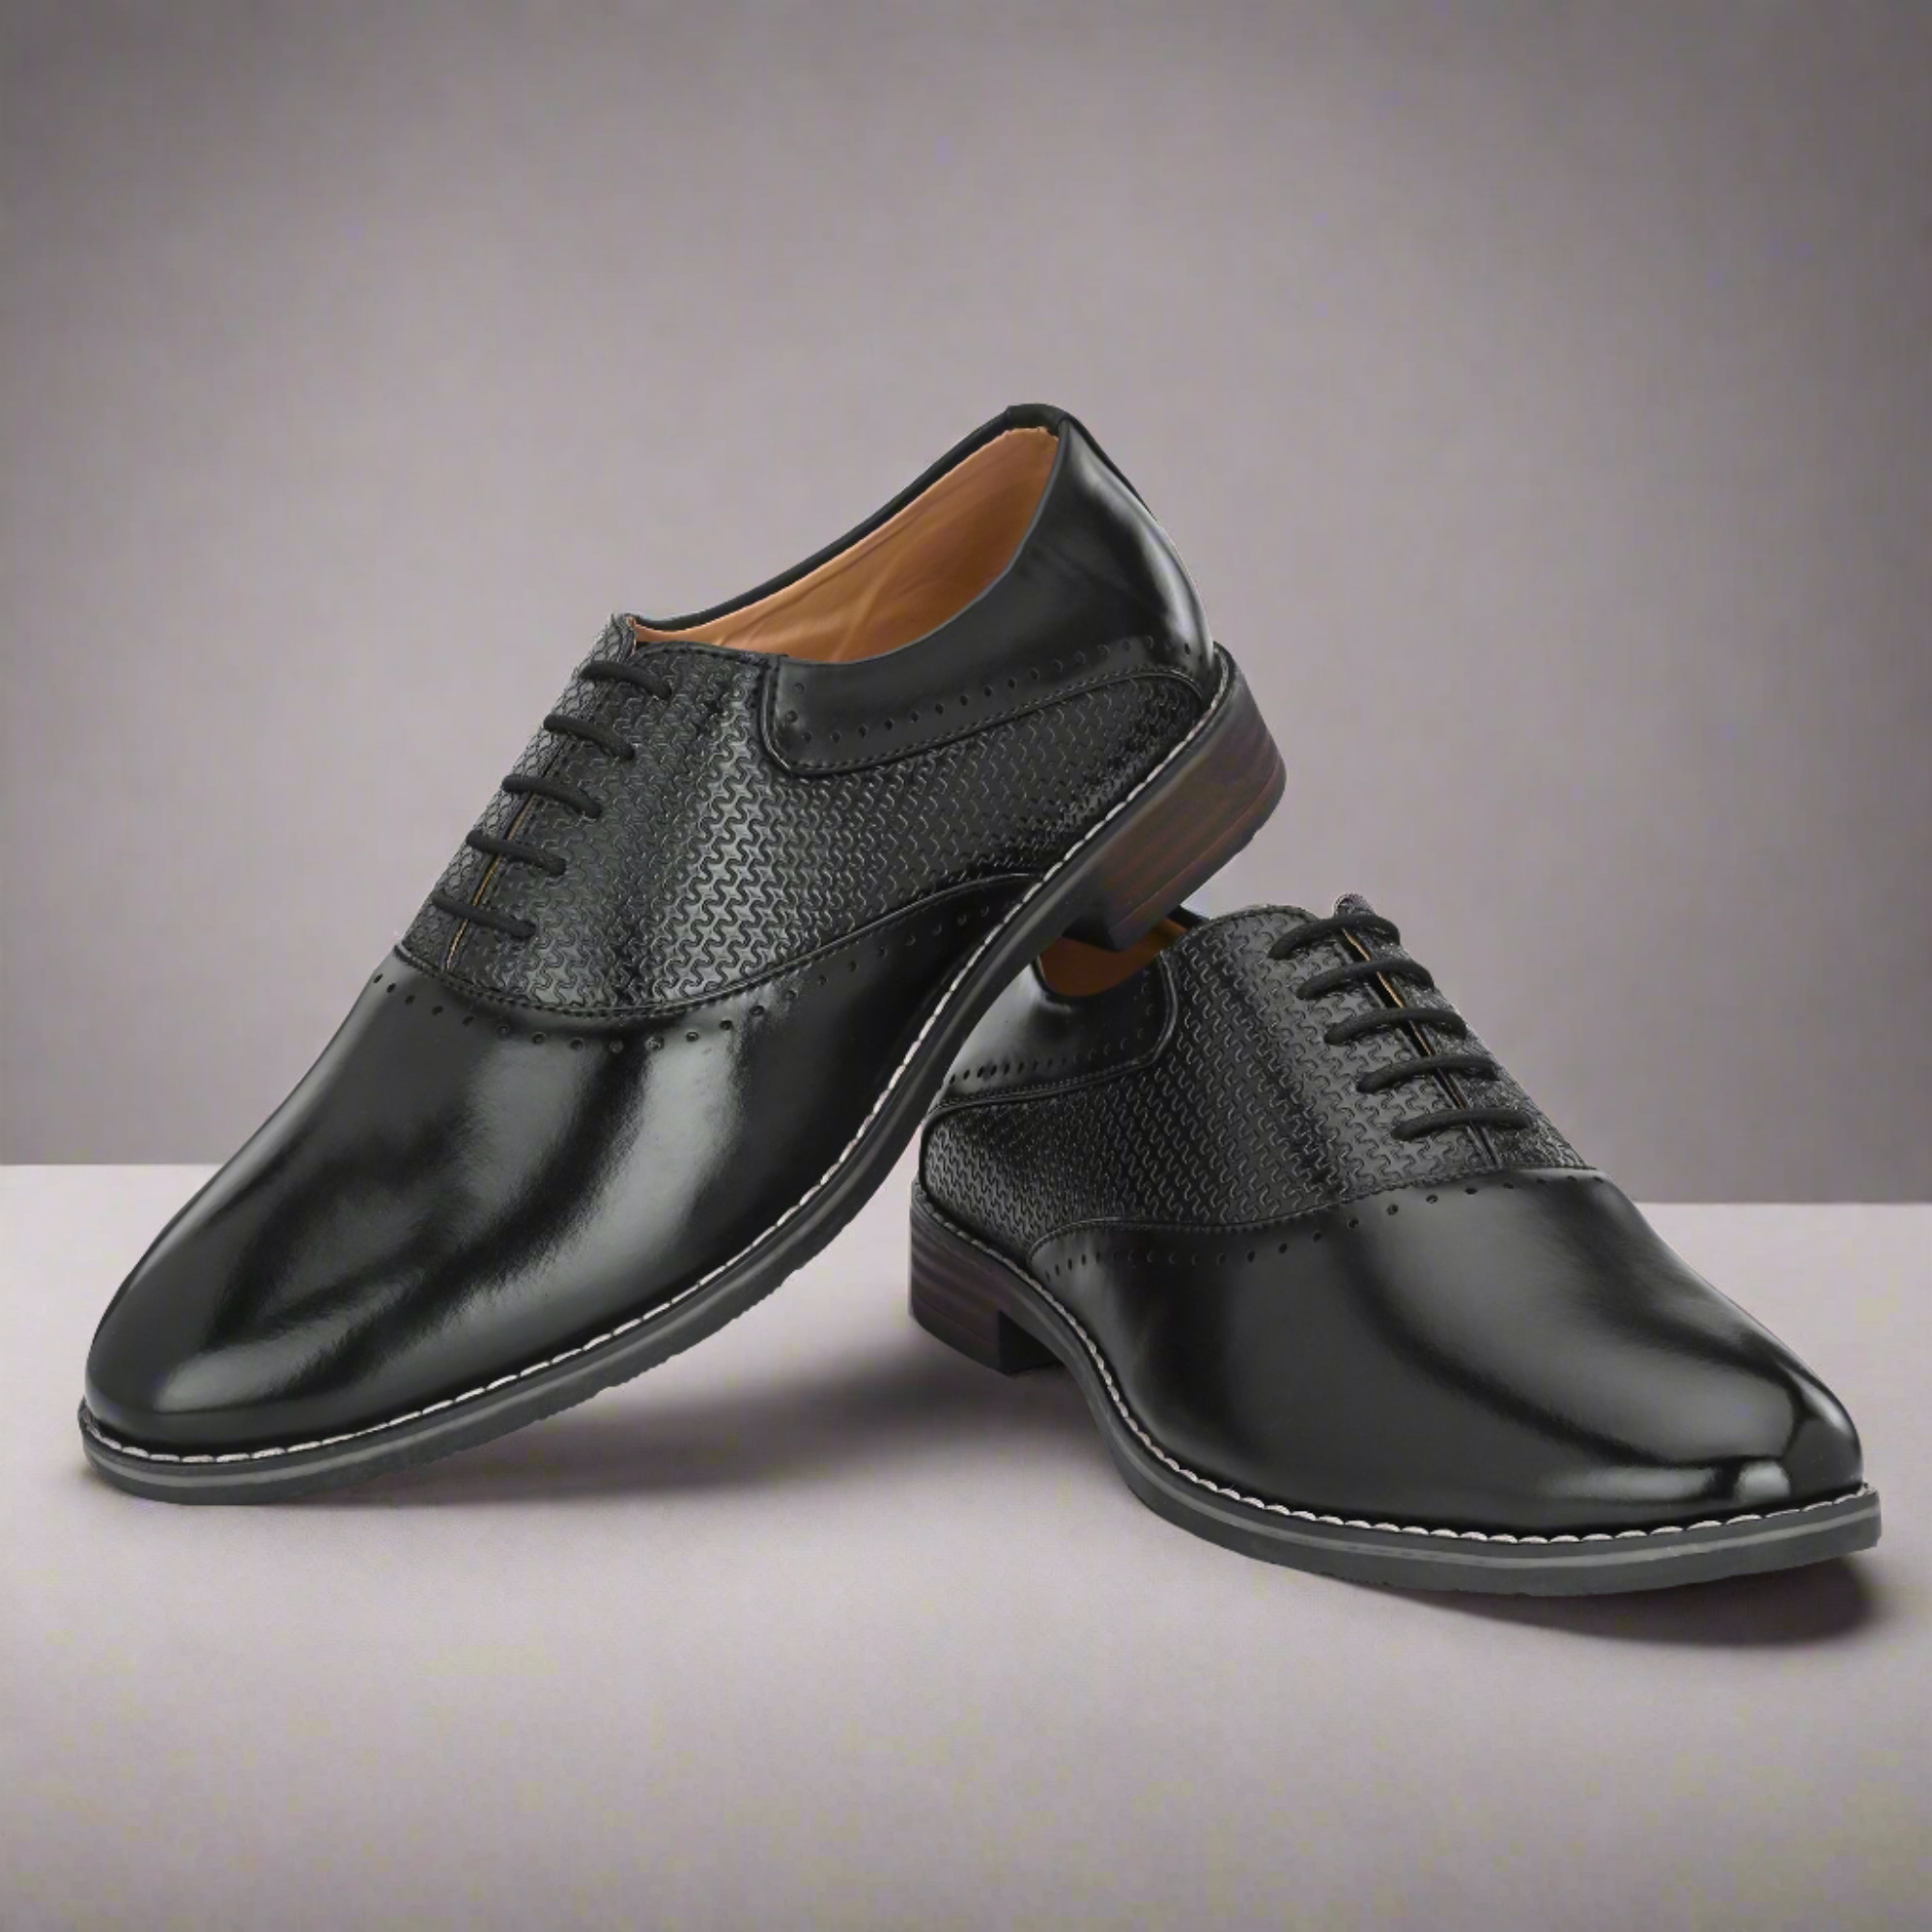 Attitudist Unisex Handcrafted Oxford Gradient Black Formal Laceup Derby Shoes With Semi Chatai Design